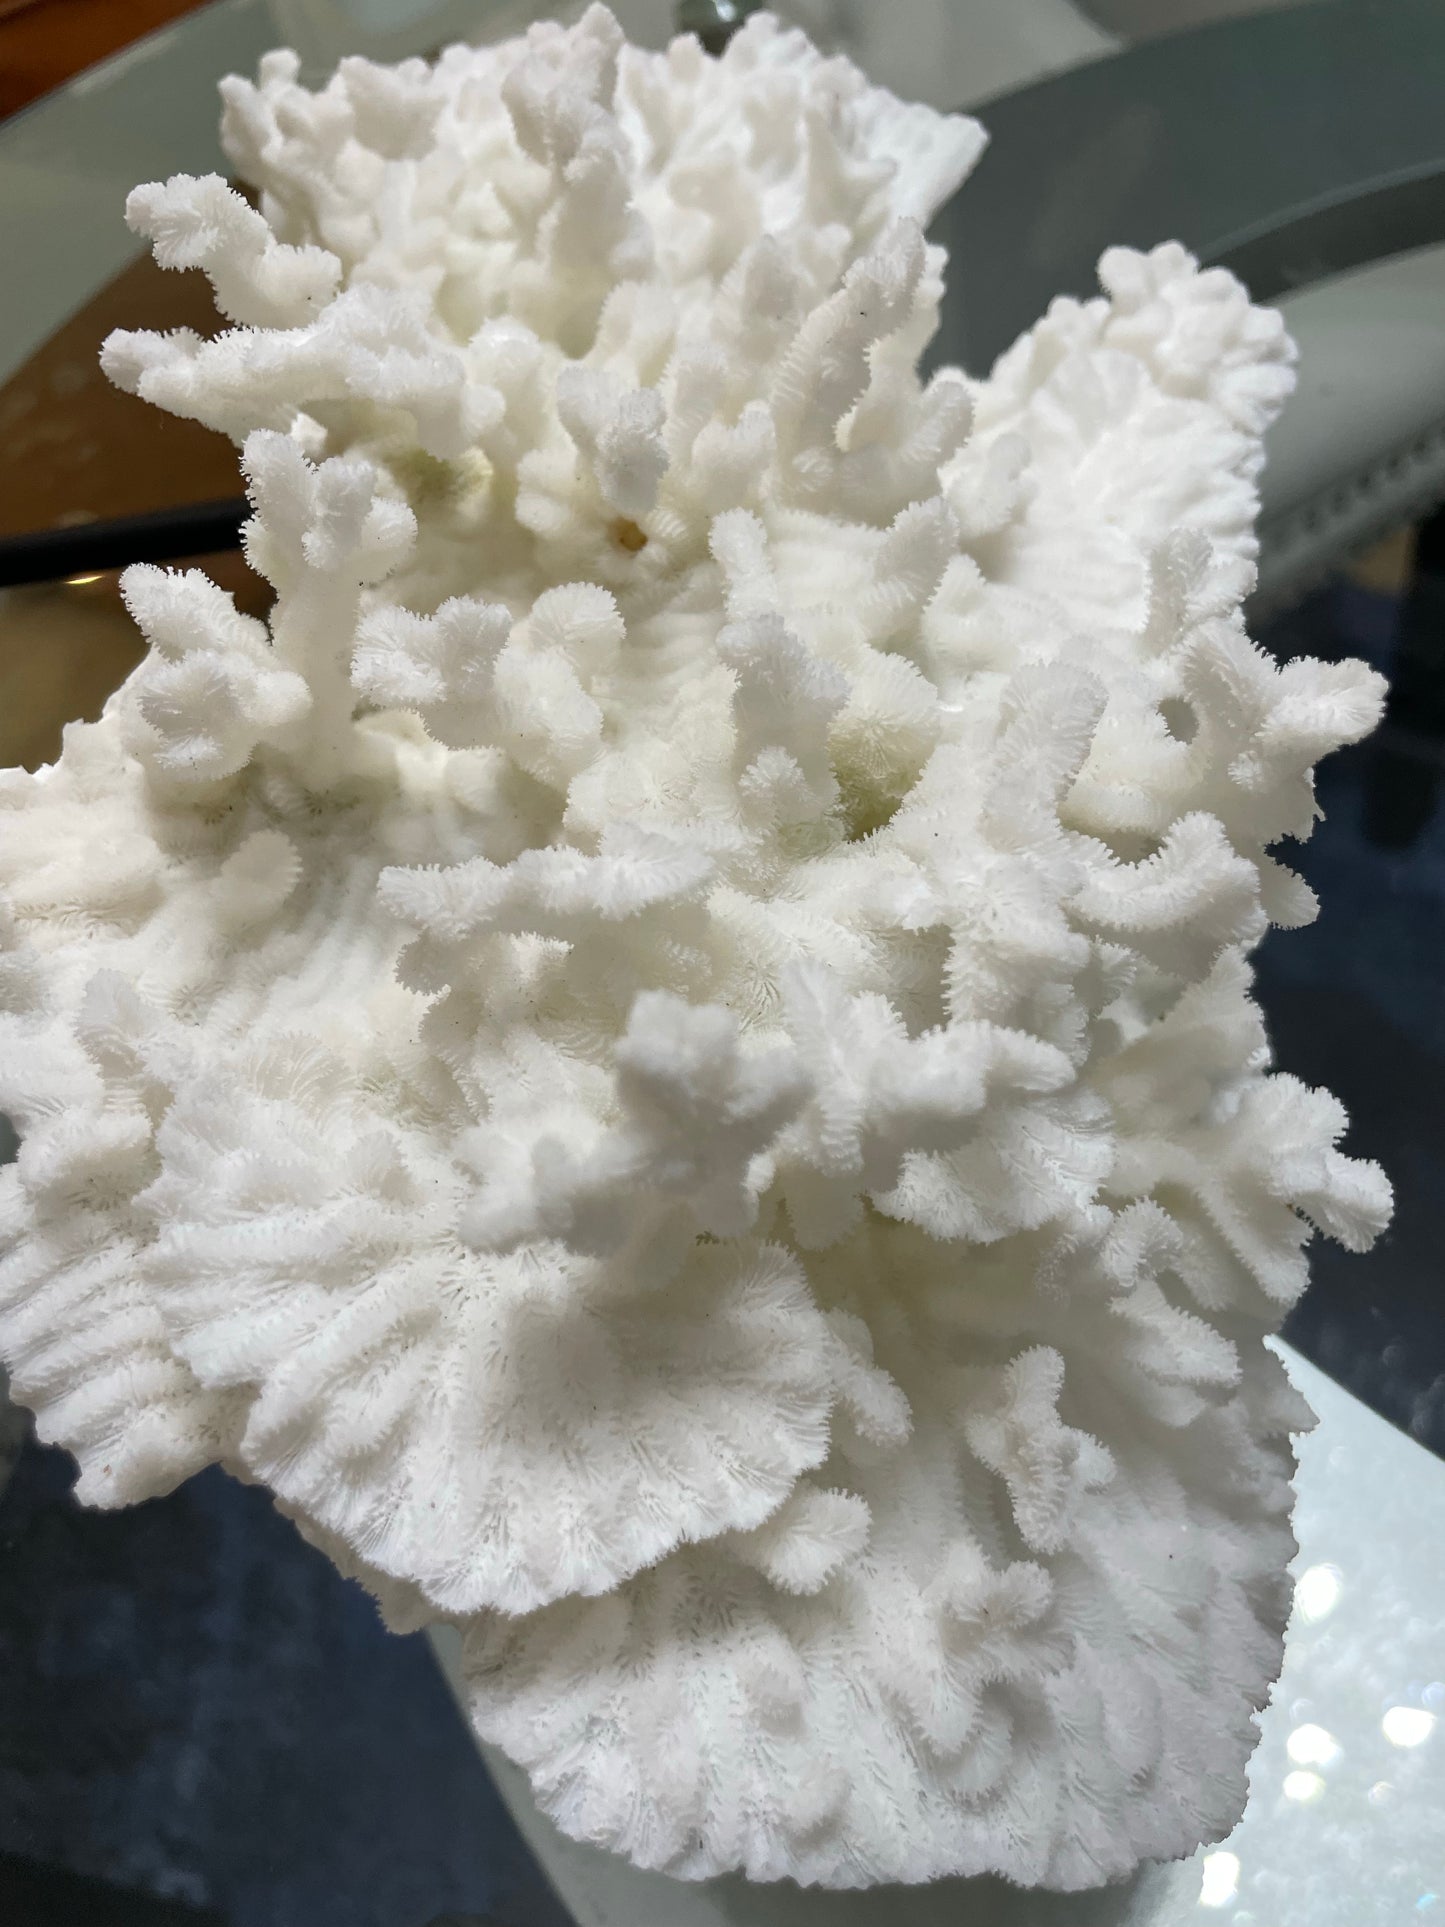 Merulina Coral (11”x10”) on Metal Stand